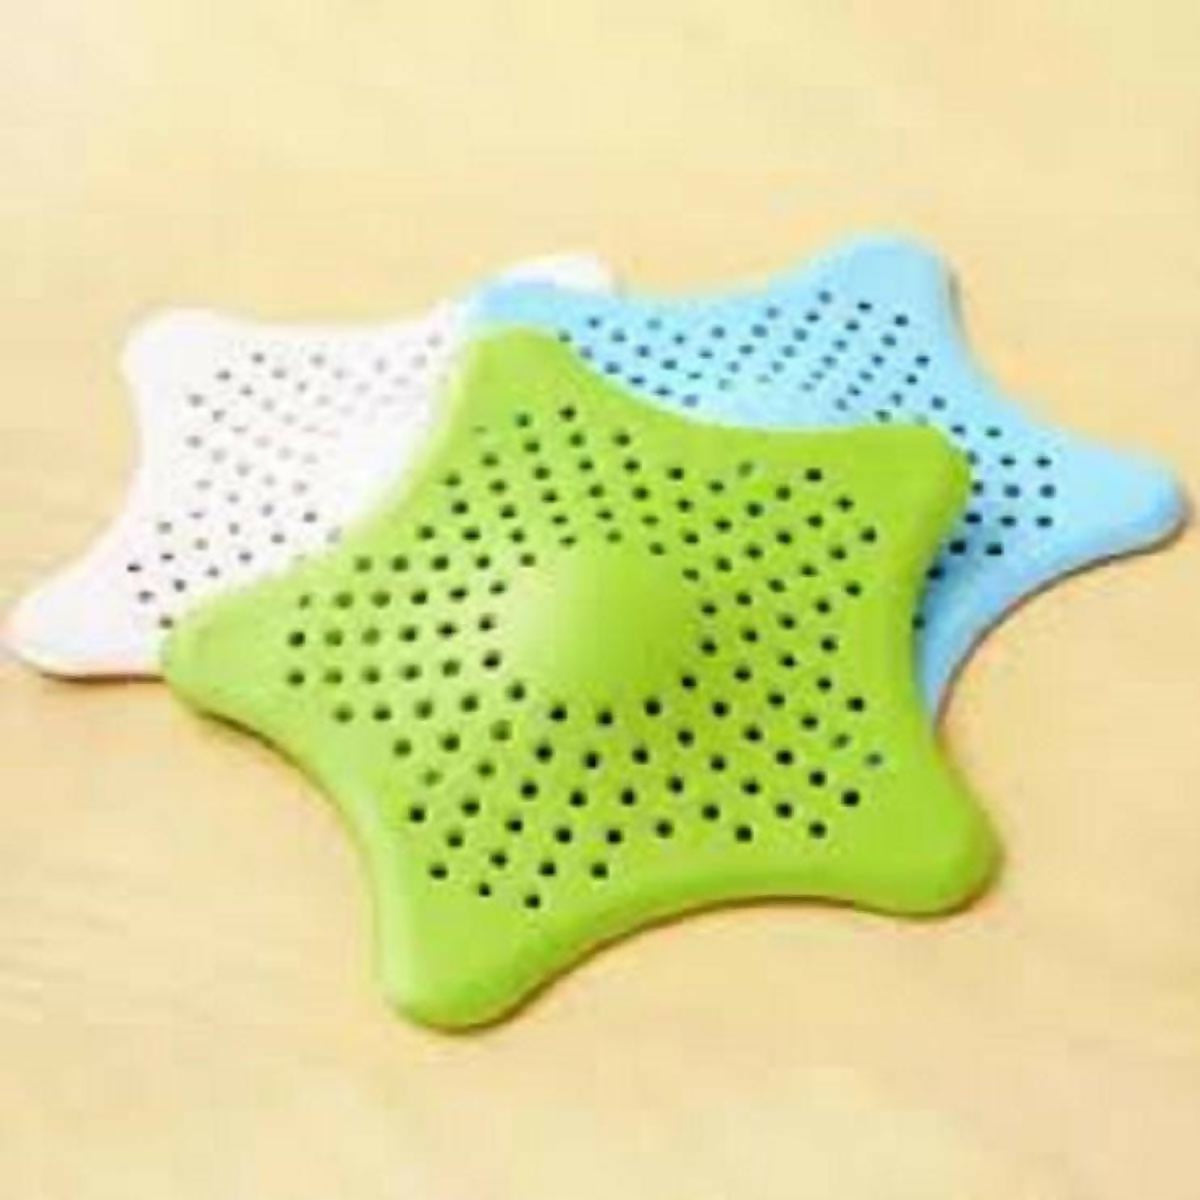 Pack of 2 Silicone Rubber Five-pointed Star Sink Filter